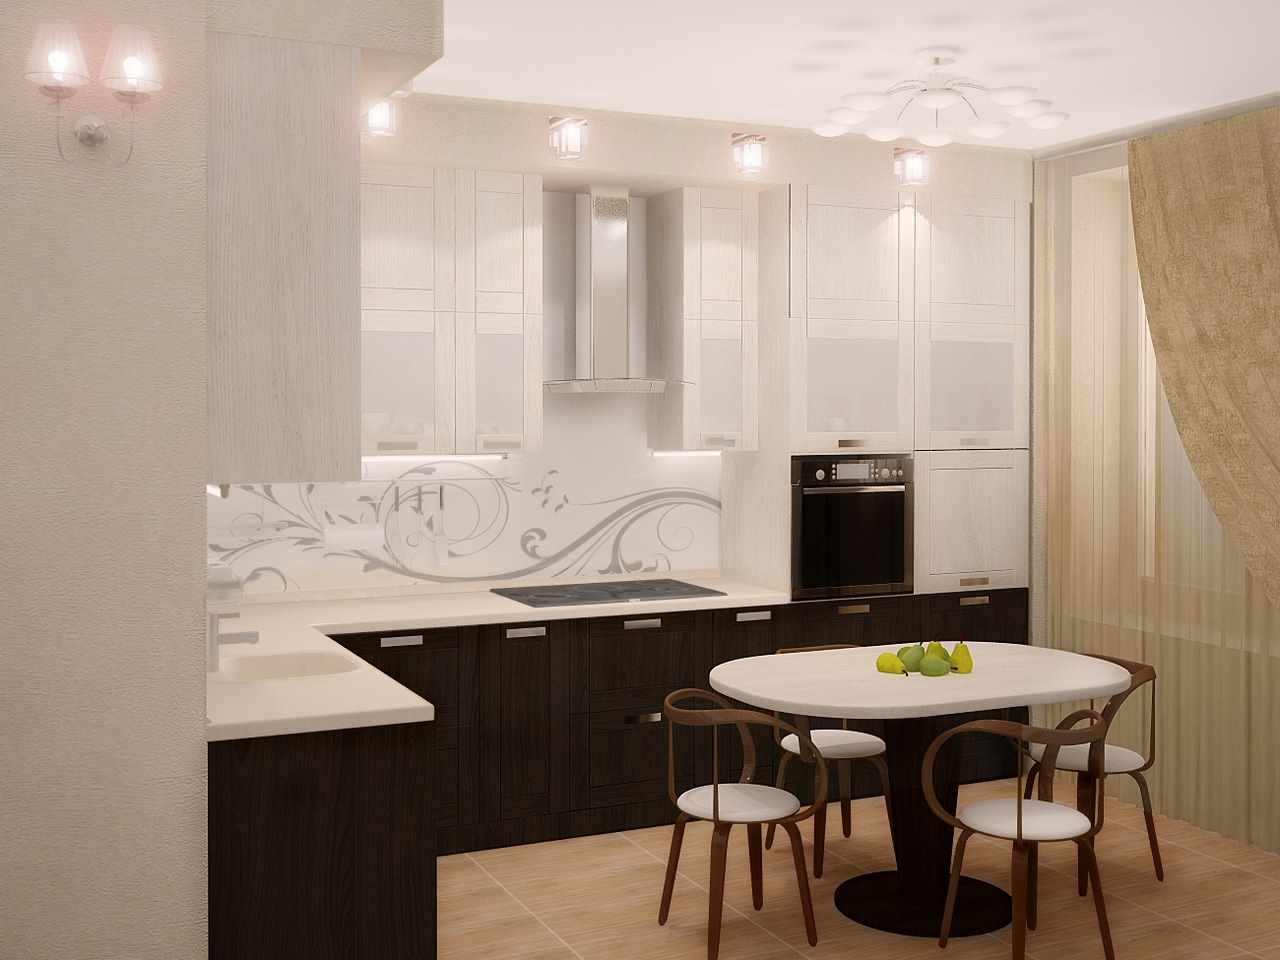 An example of a bright kitchen interior